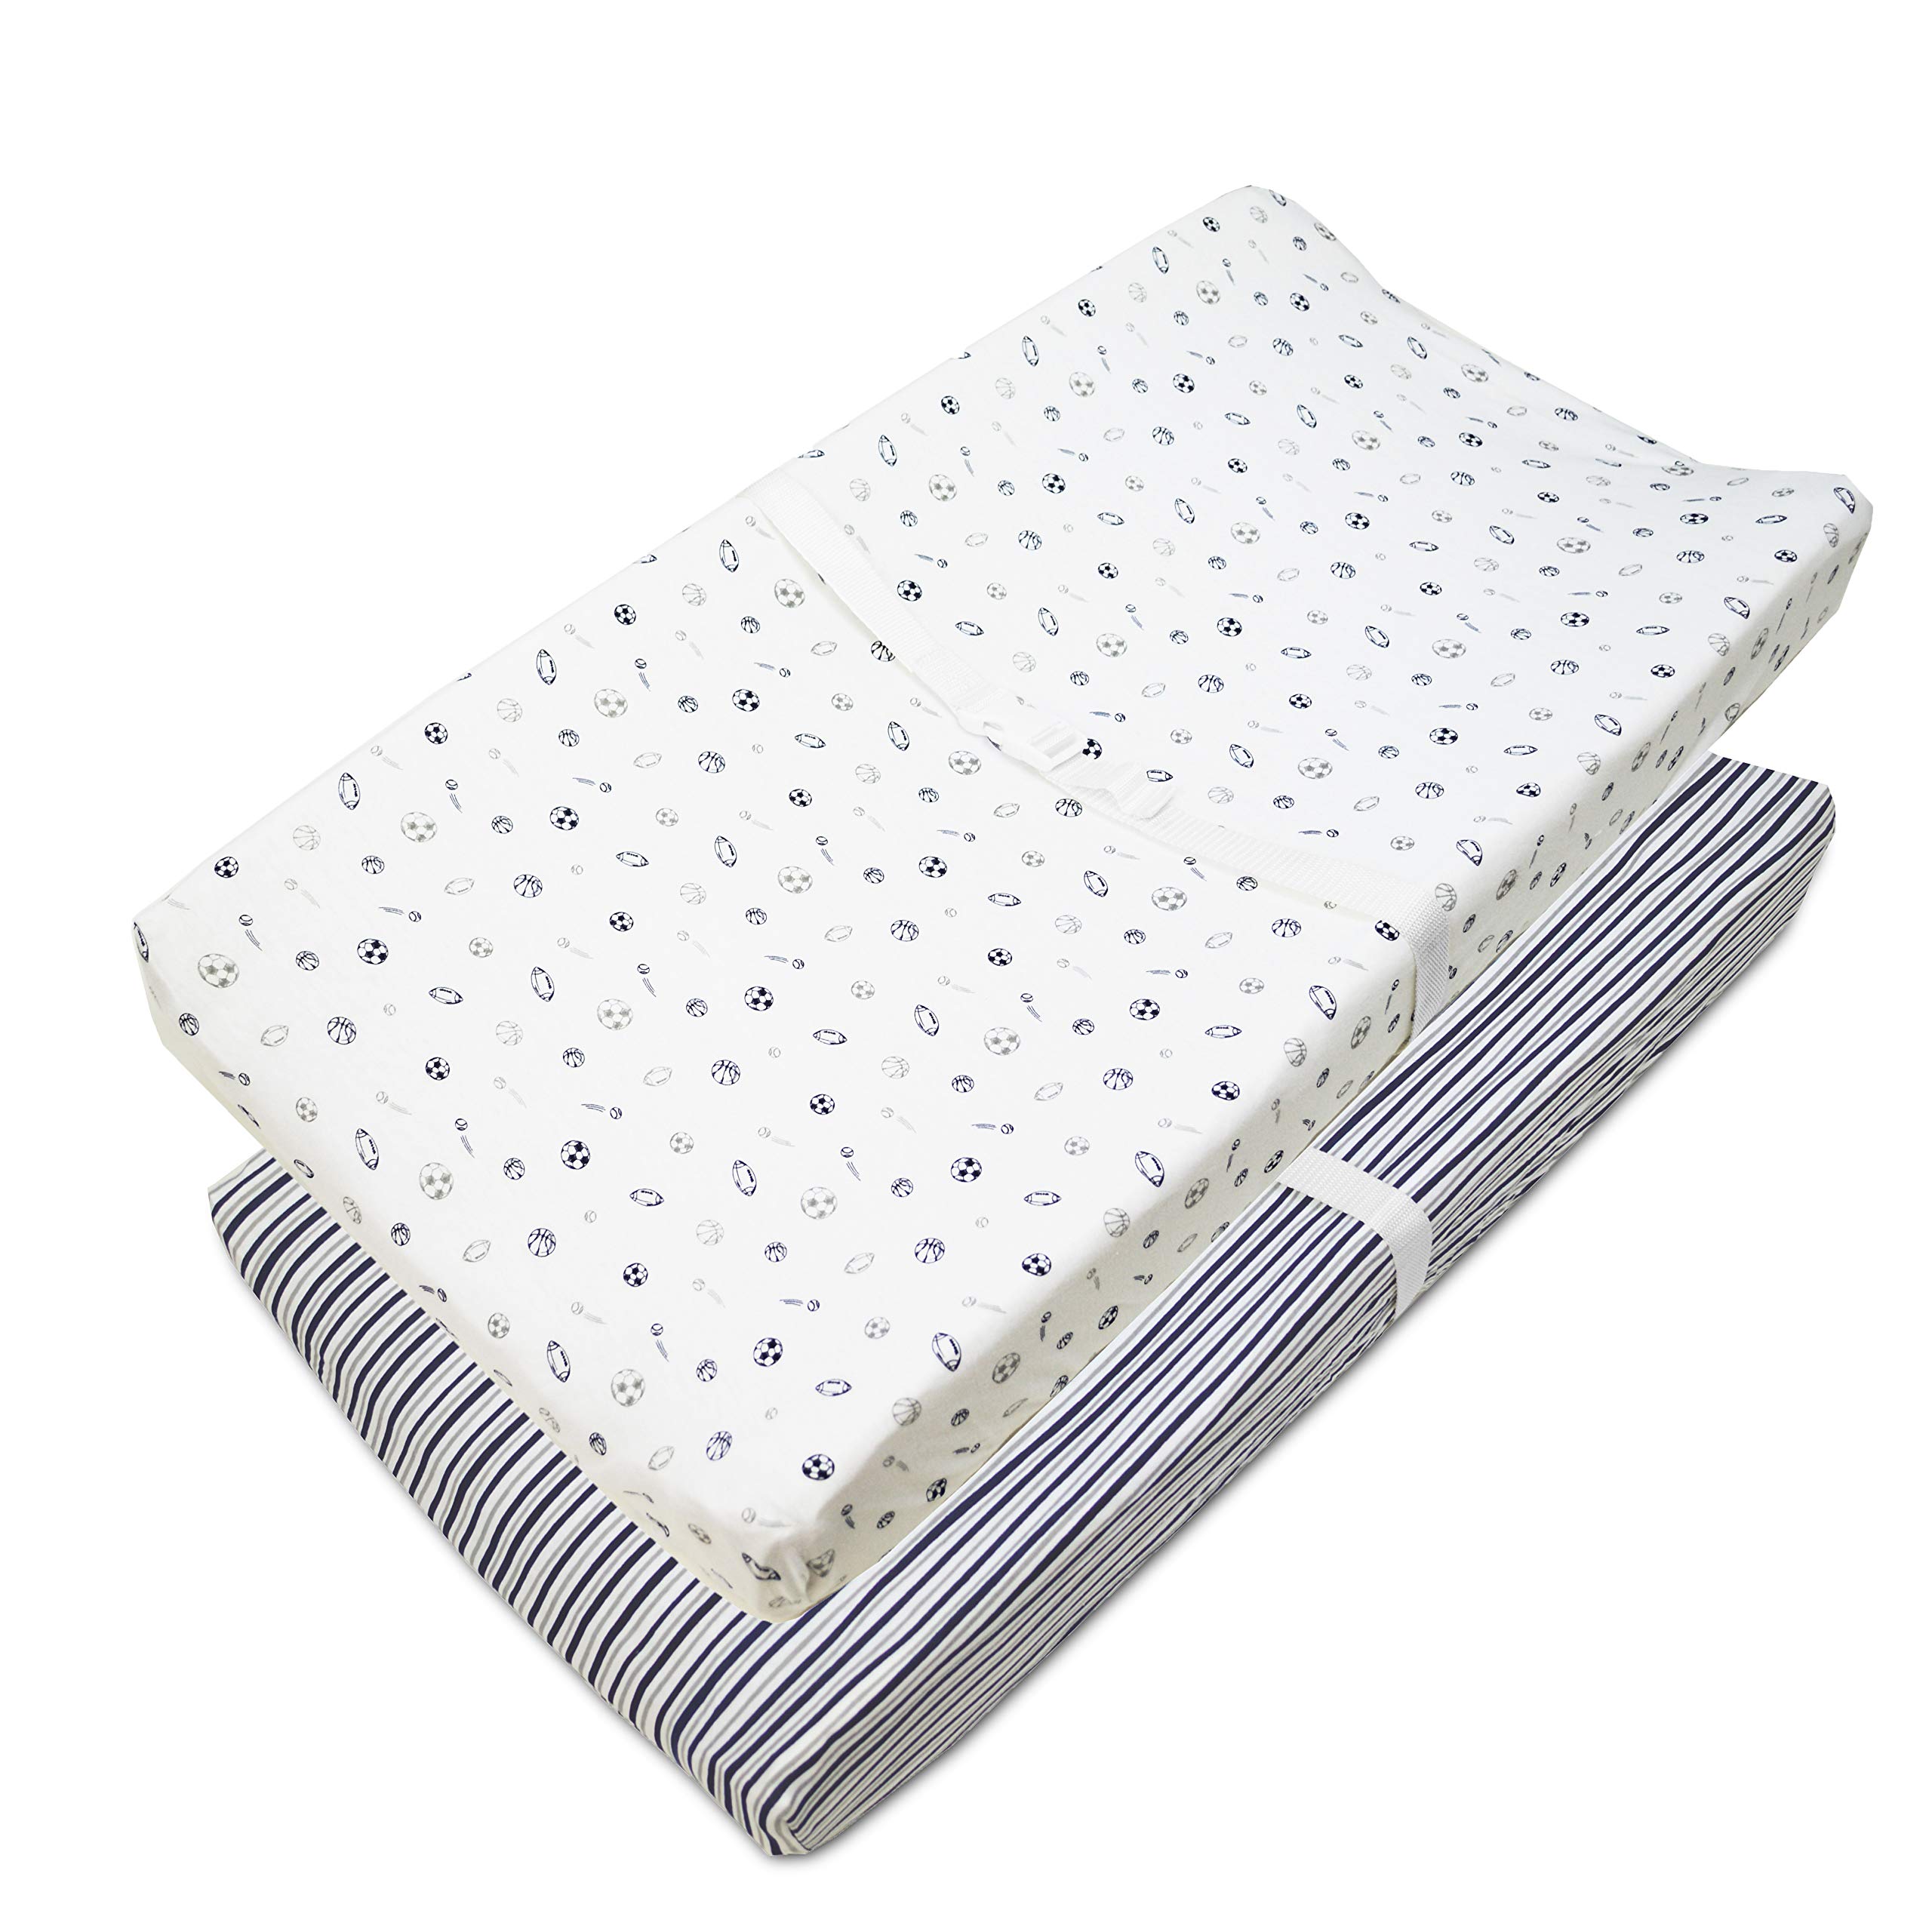 American Baby Company 2 Pack Printed 100% Cotton Knit Fitted Contoured Changing Table Pad Cover - Compatible with Mika Micky Bassinet, Gray Stripes and Sports, for Boys and Girls